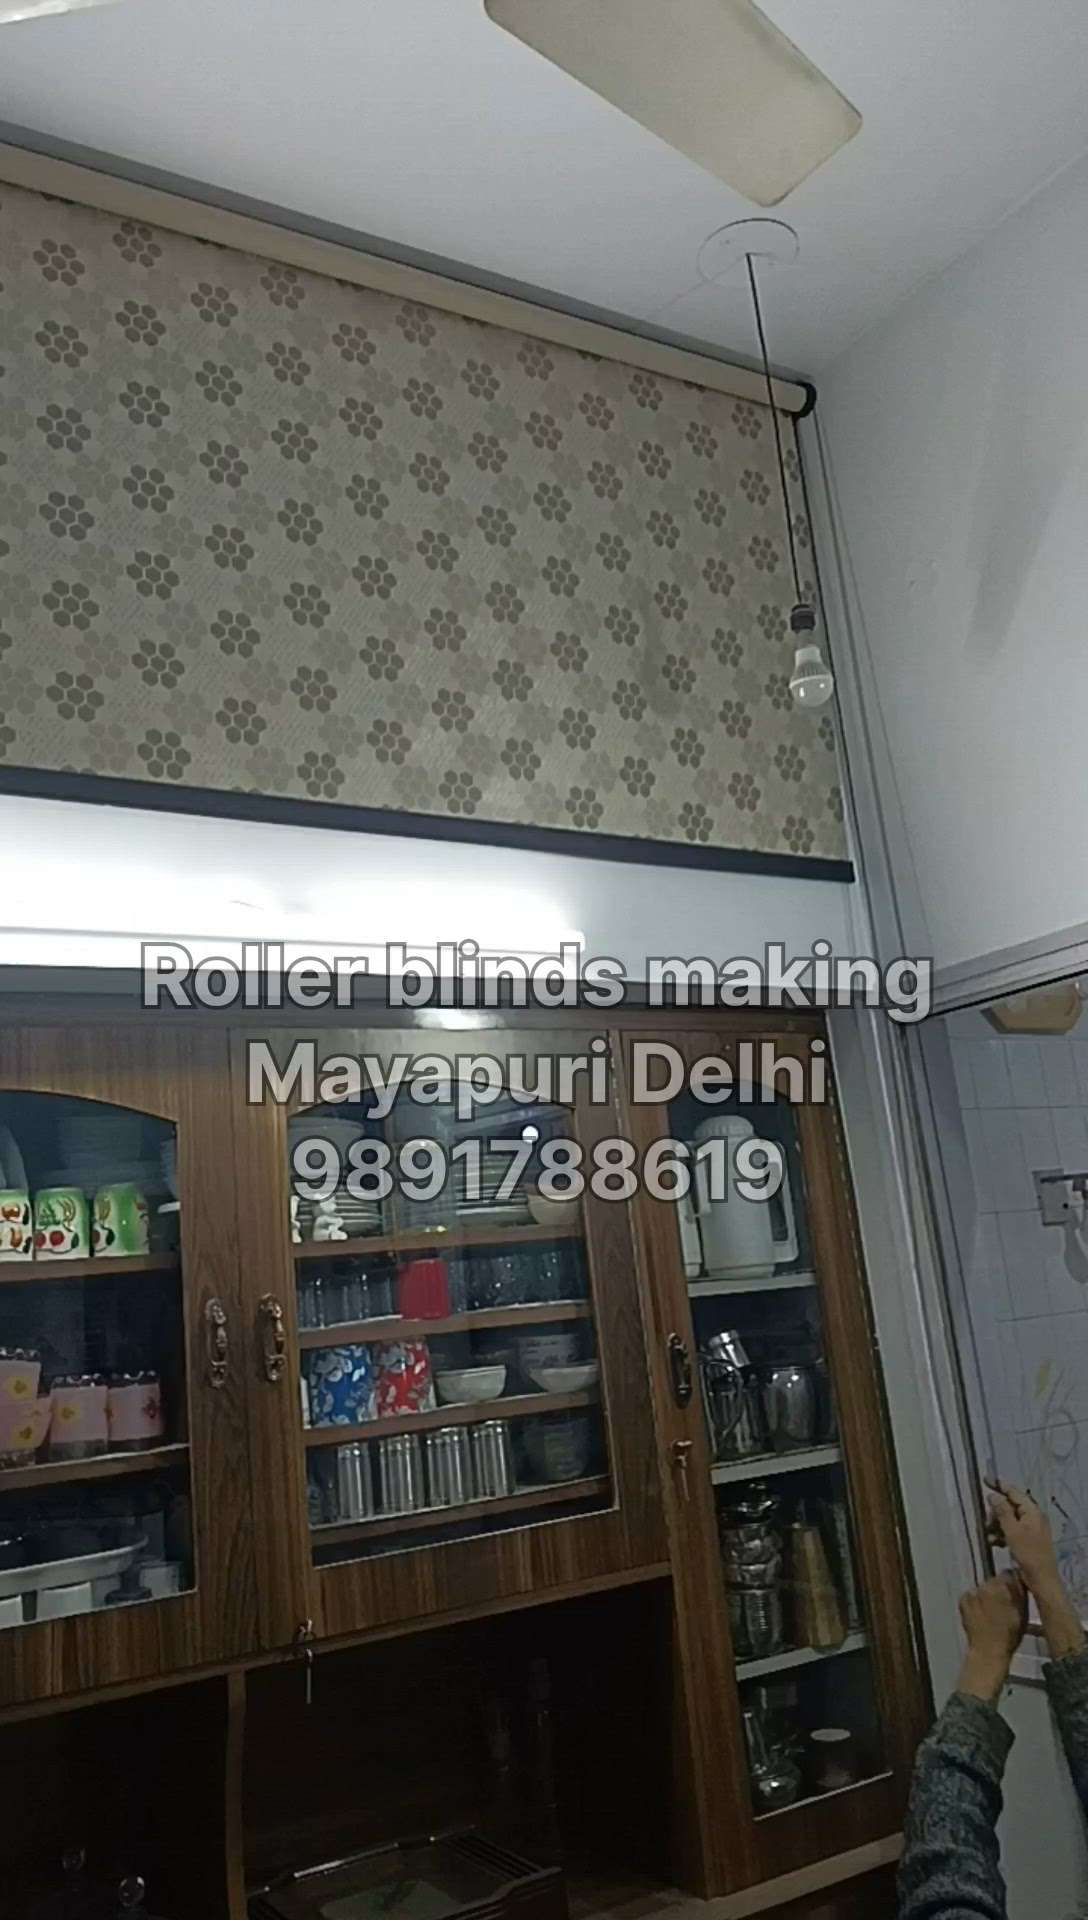 How to fit roller windows blinds installation mayapuri Delhi
mobile no - 9891788619